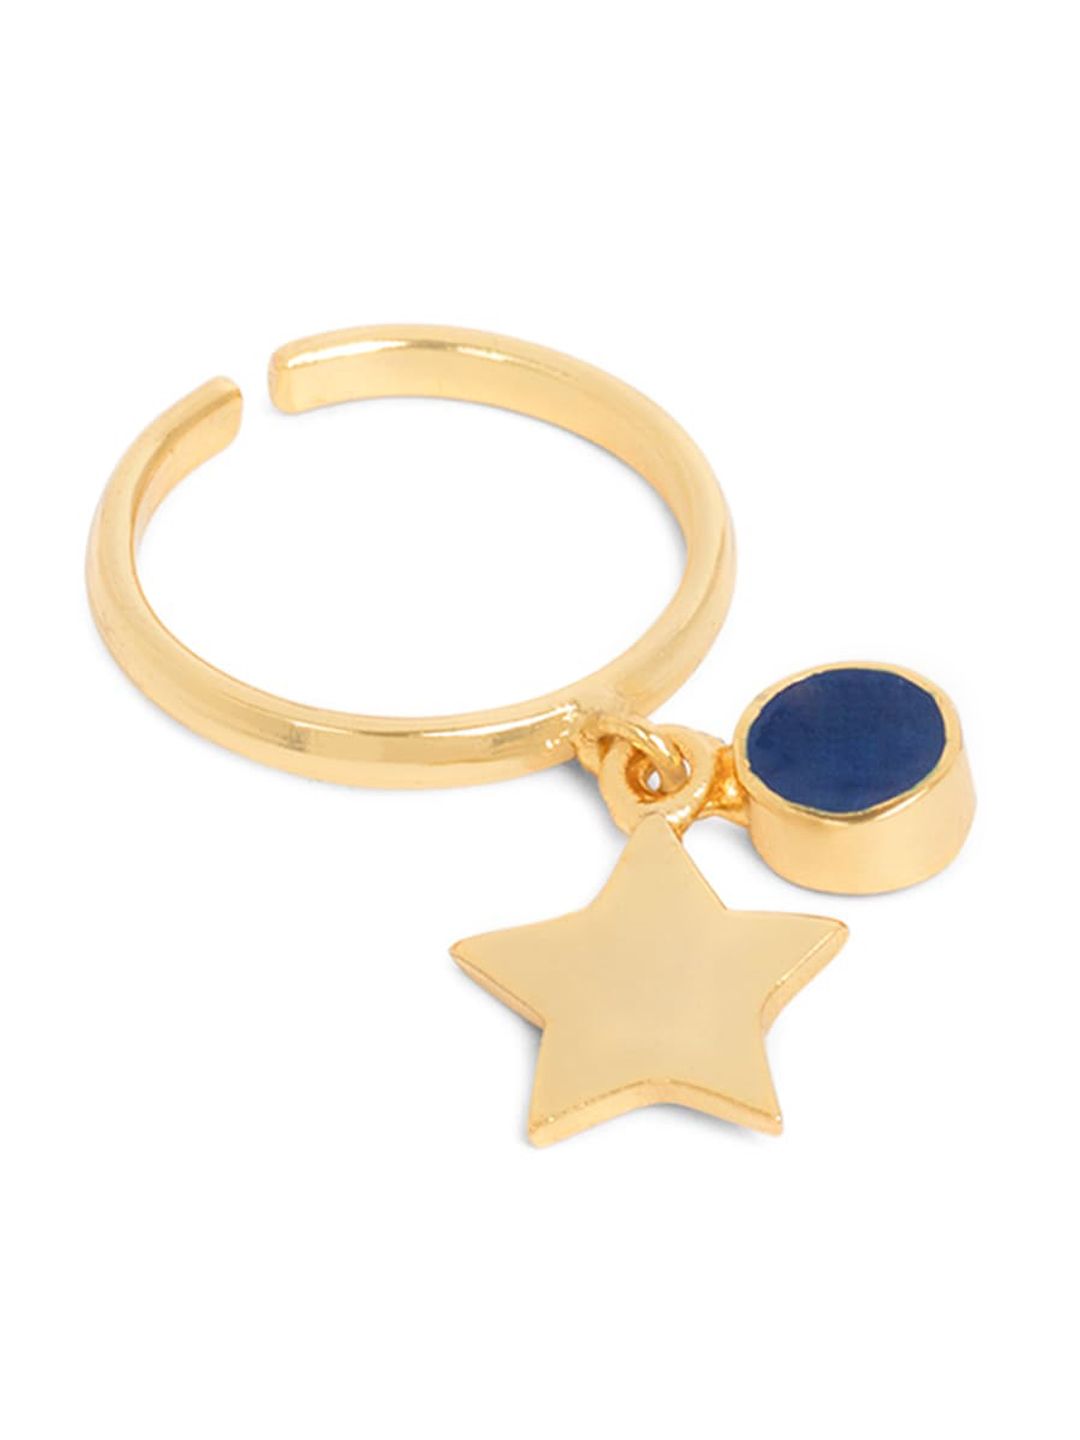 Mikoto by FableStreet Gold-Plated Blue Crystal-Studded Adjustable Finger Ring Price in India